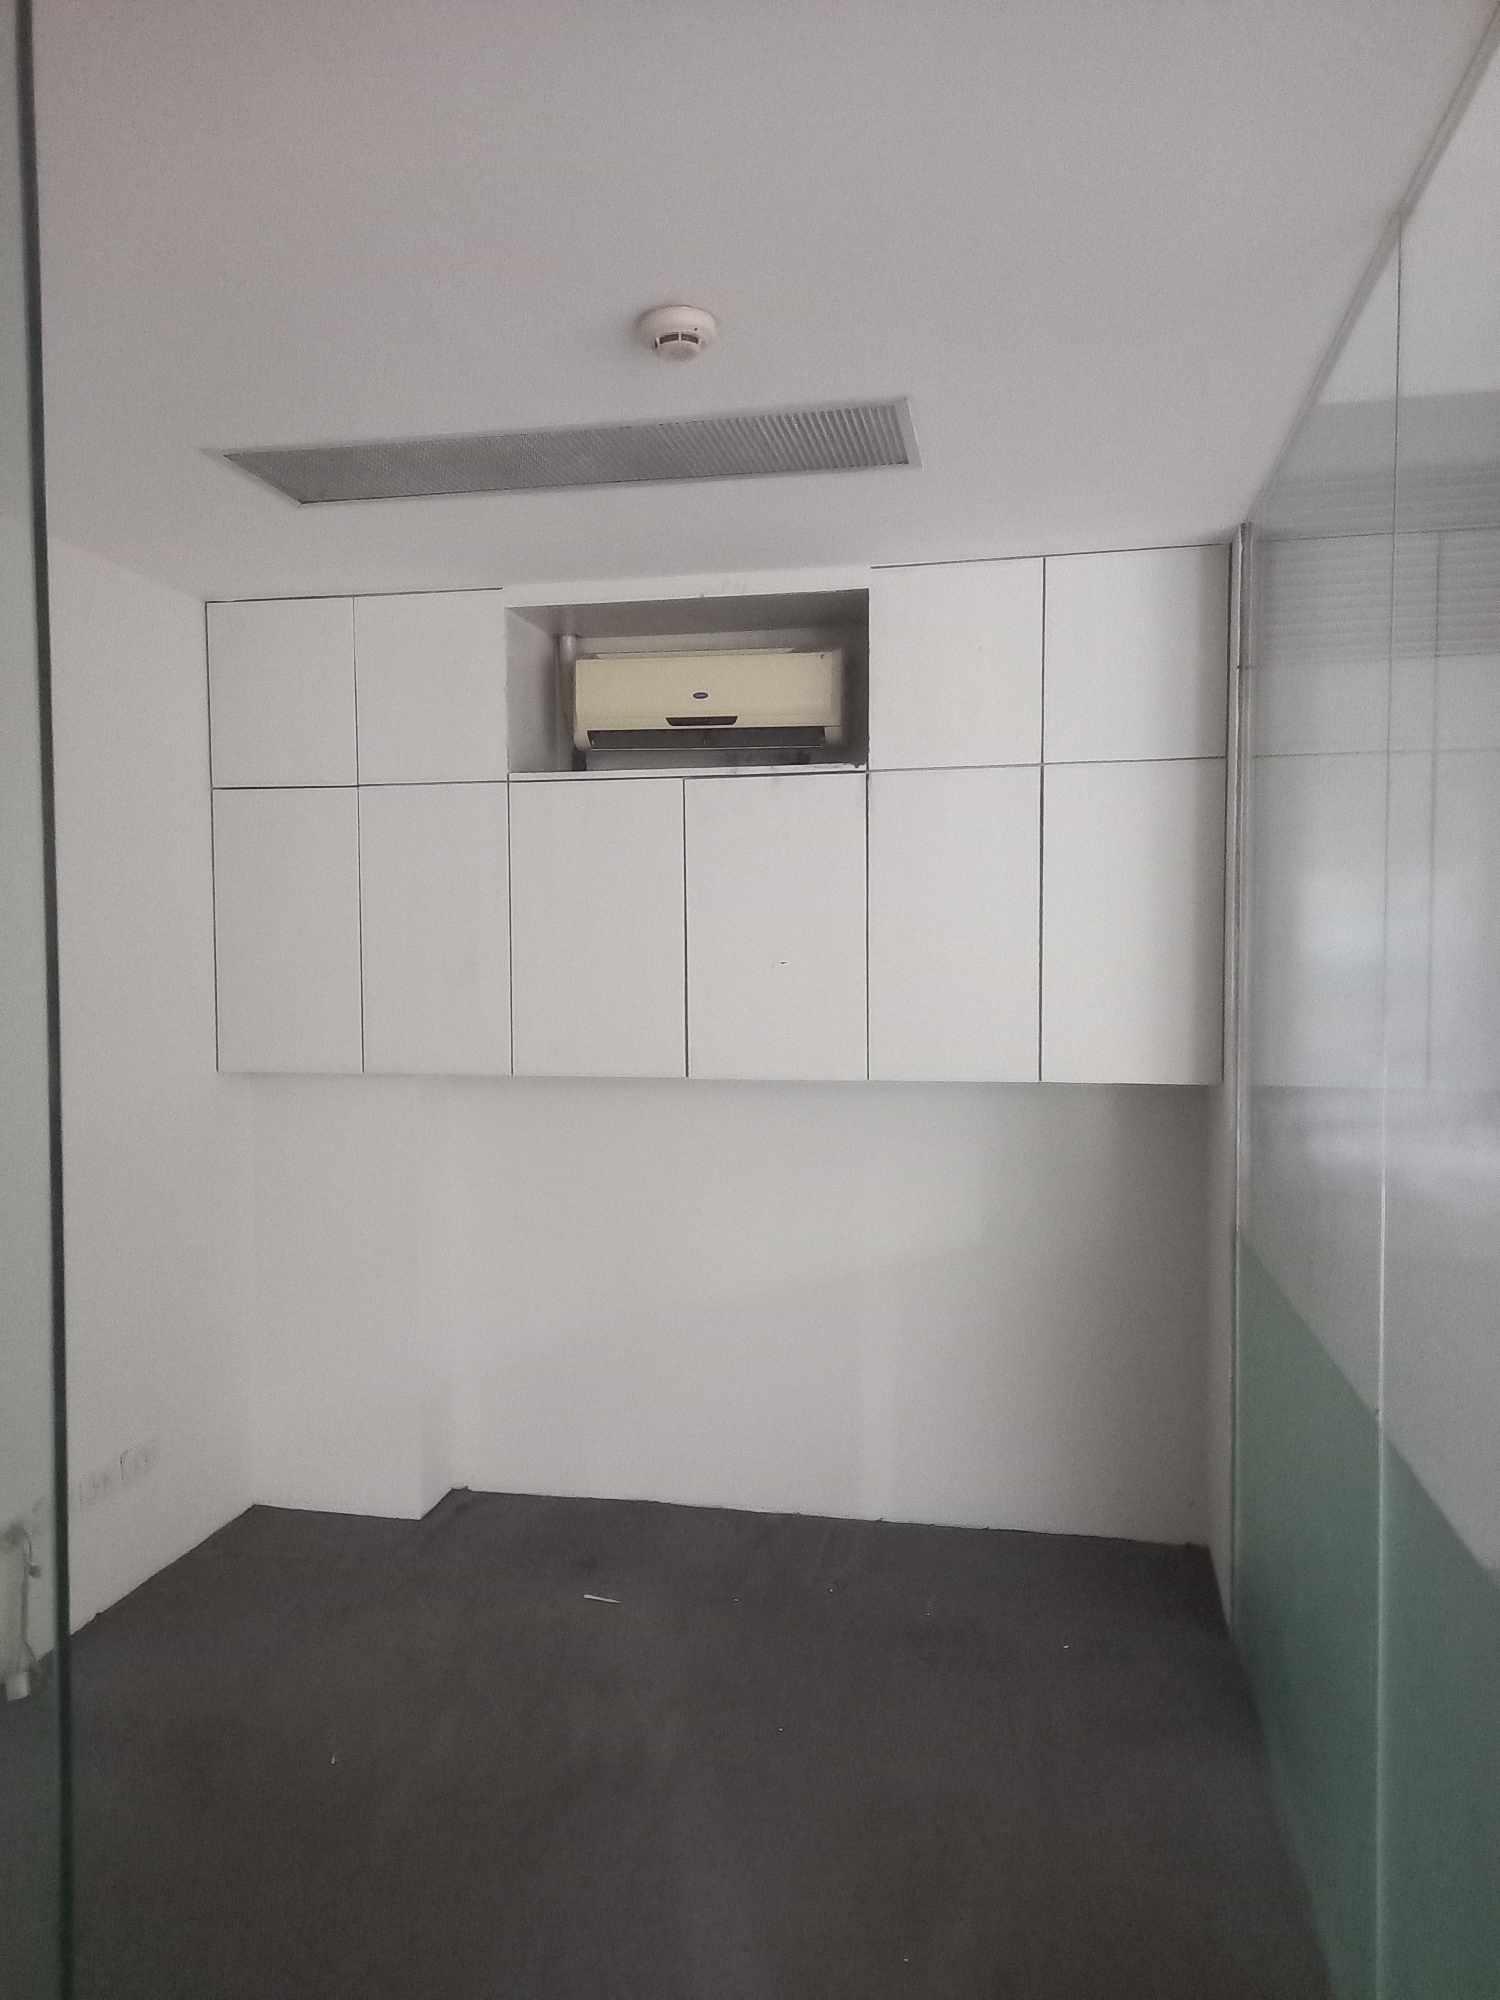 For Rent Commercial Ground Floor Good For Bank Ortigas 149sqm